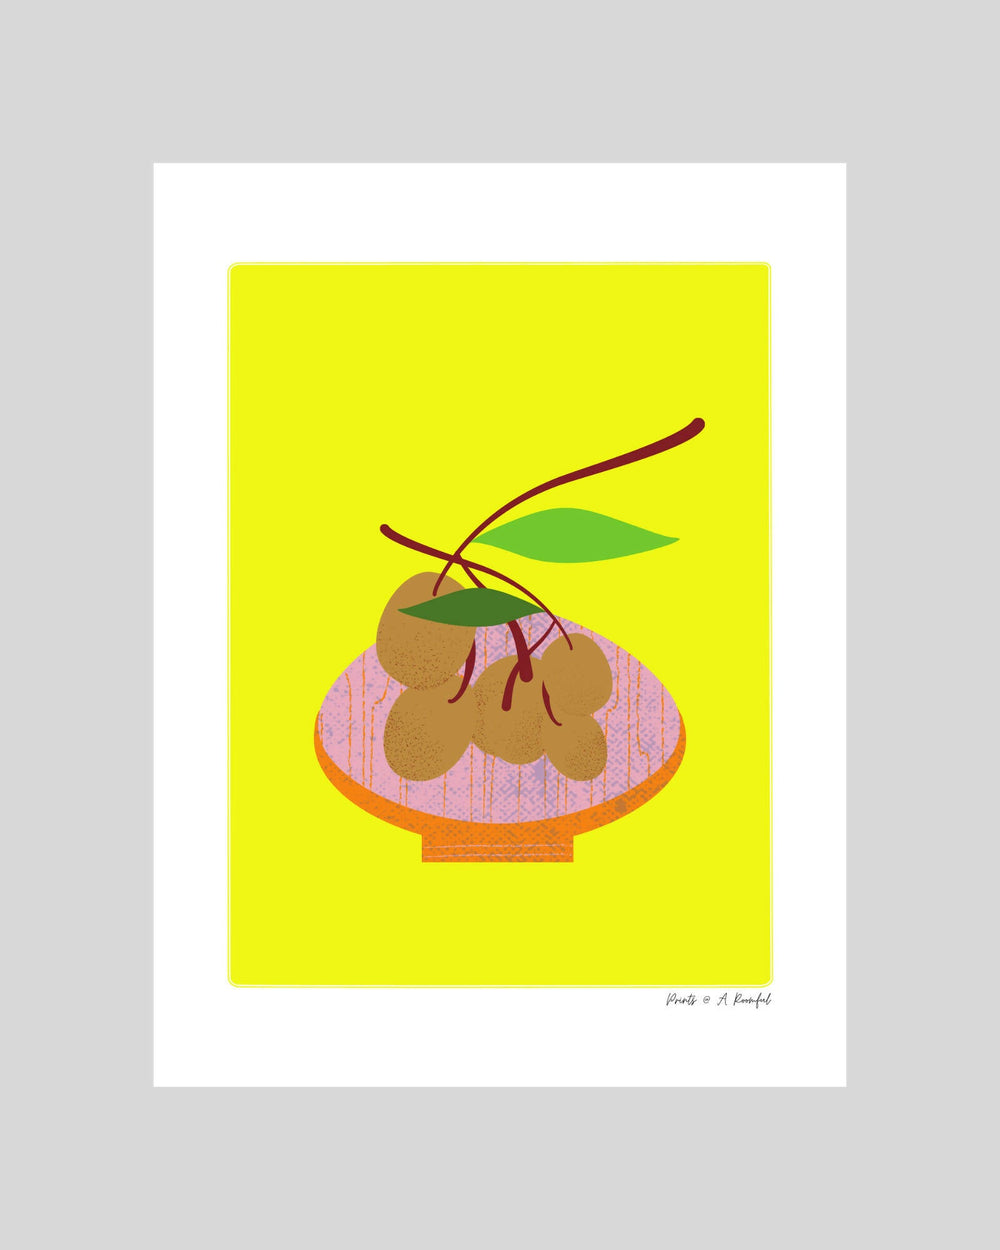 wall art : inspired by colours and fruits (logans) Art Prints@ARoomful 